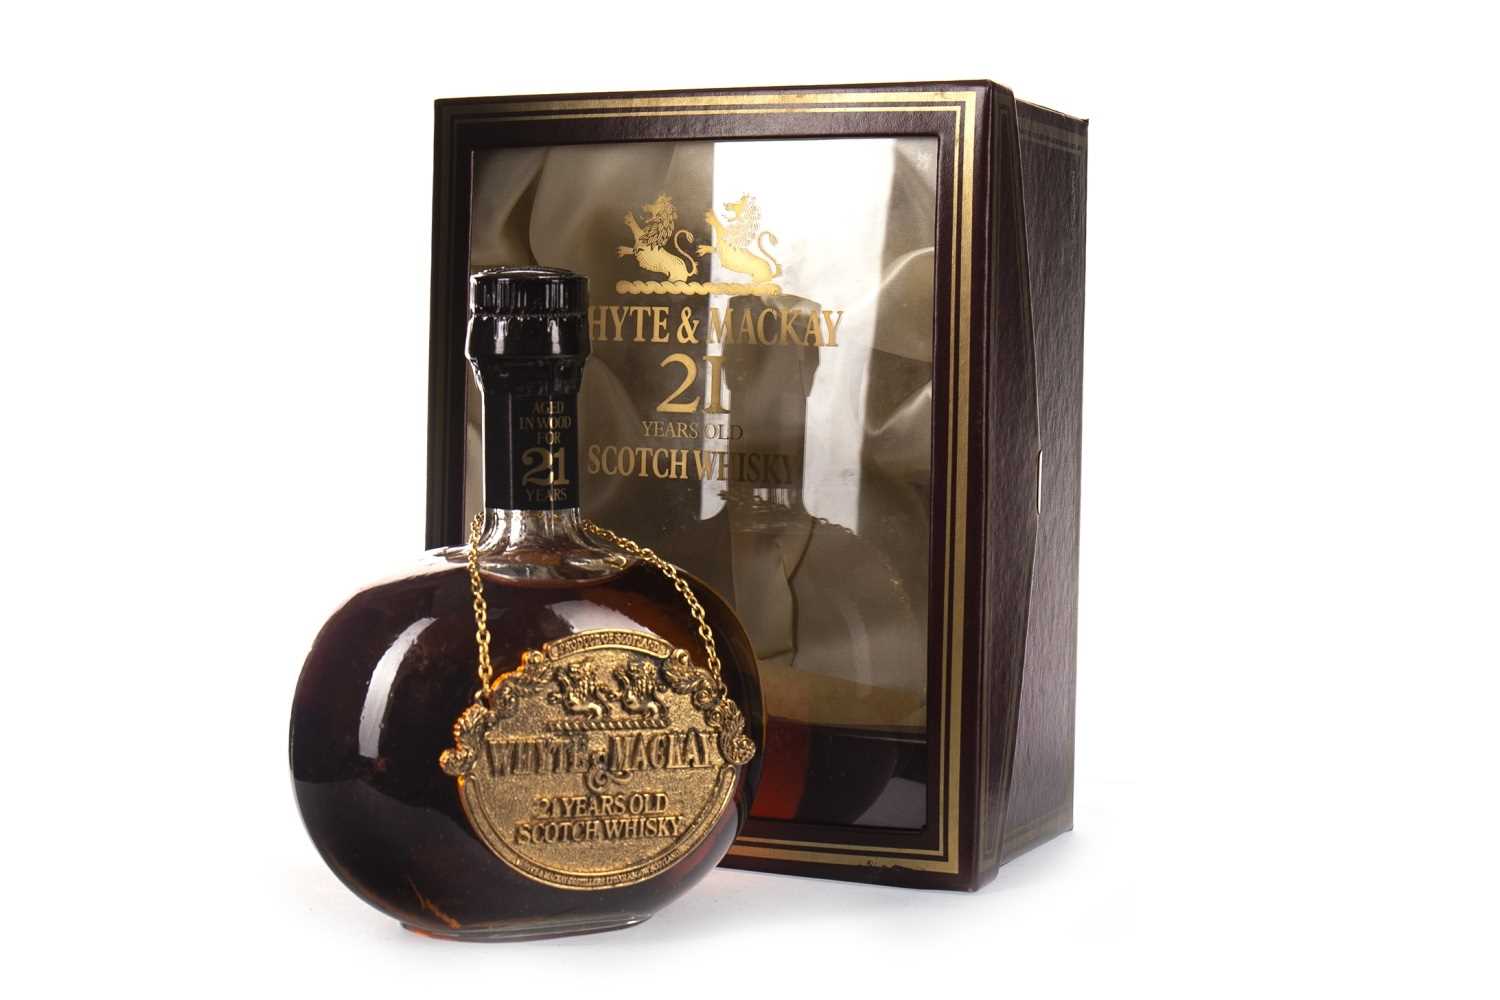 Lot 438 - WHYTE & MACKAY 21 YEARS OLD